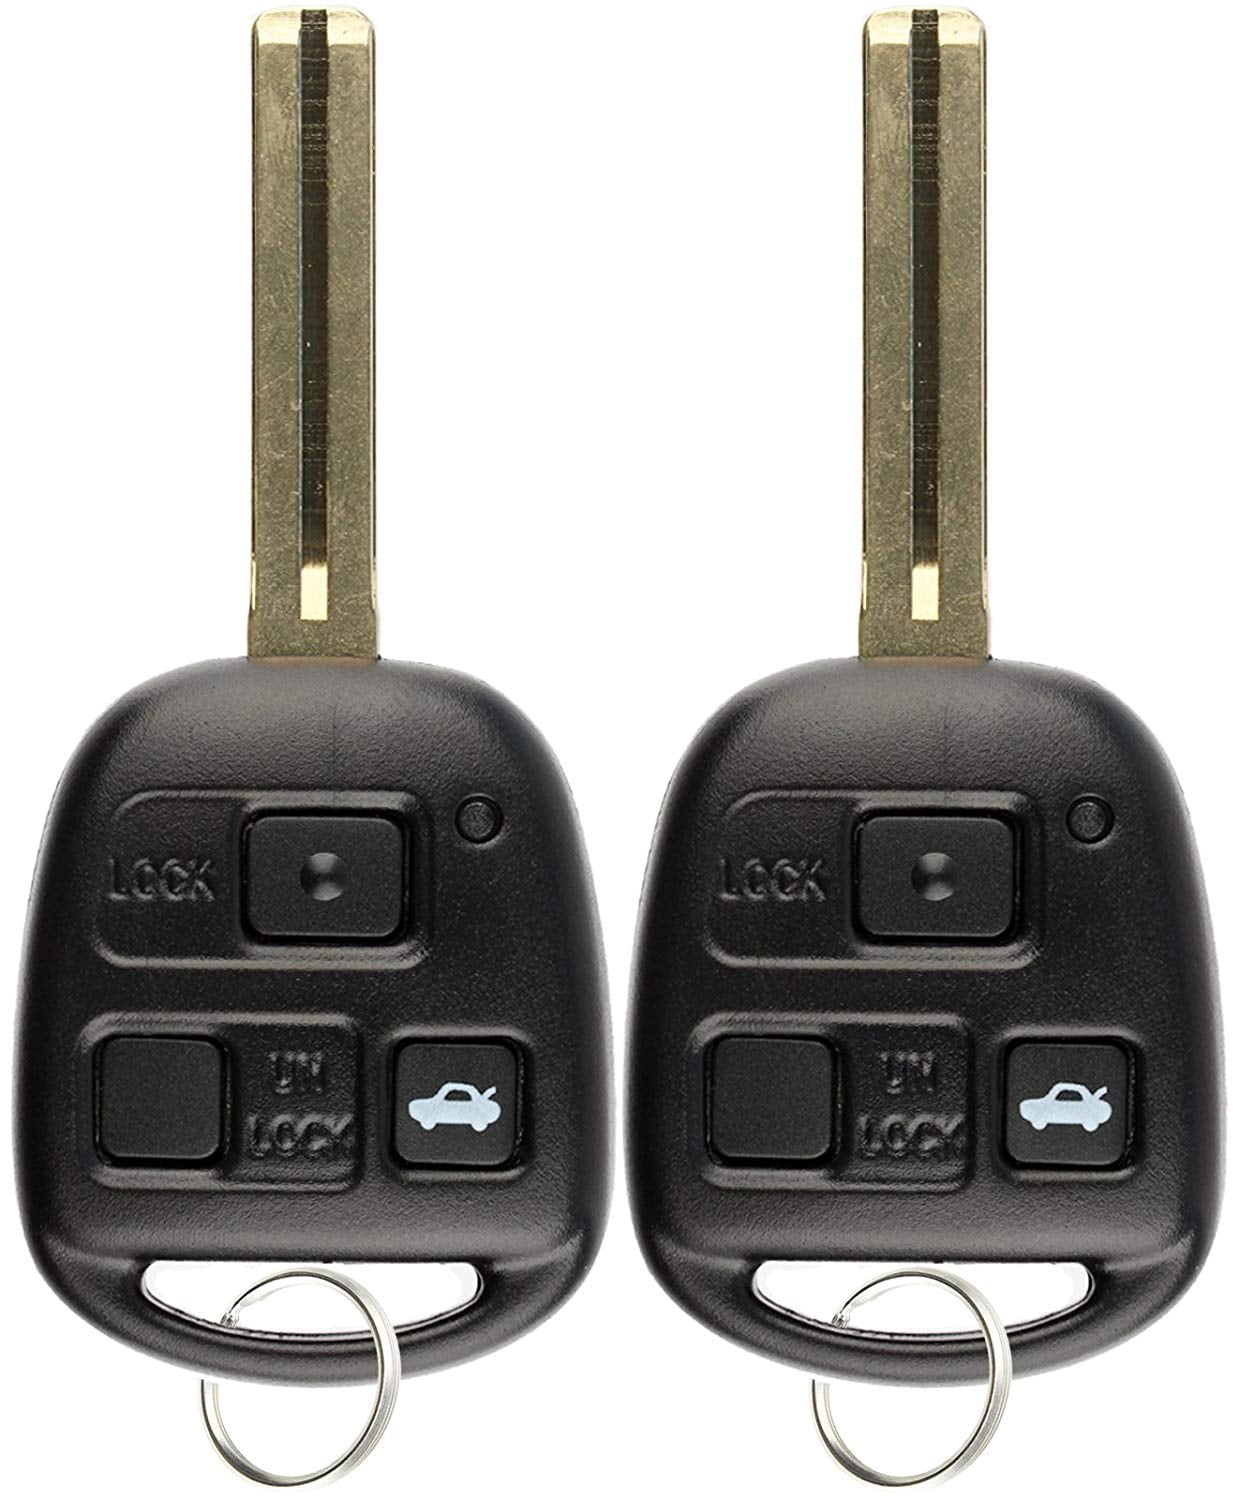 2 Replacement Remote Entry Car Key Fob for Lexus 2001-2006 LS430 2002-2010 SC430 